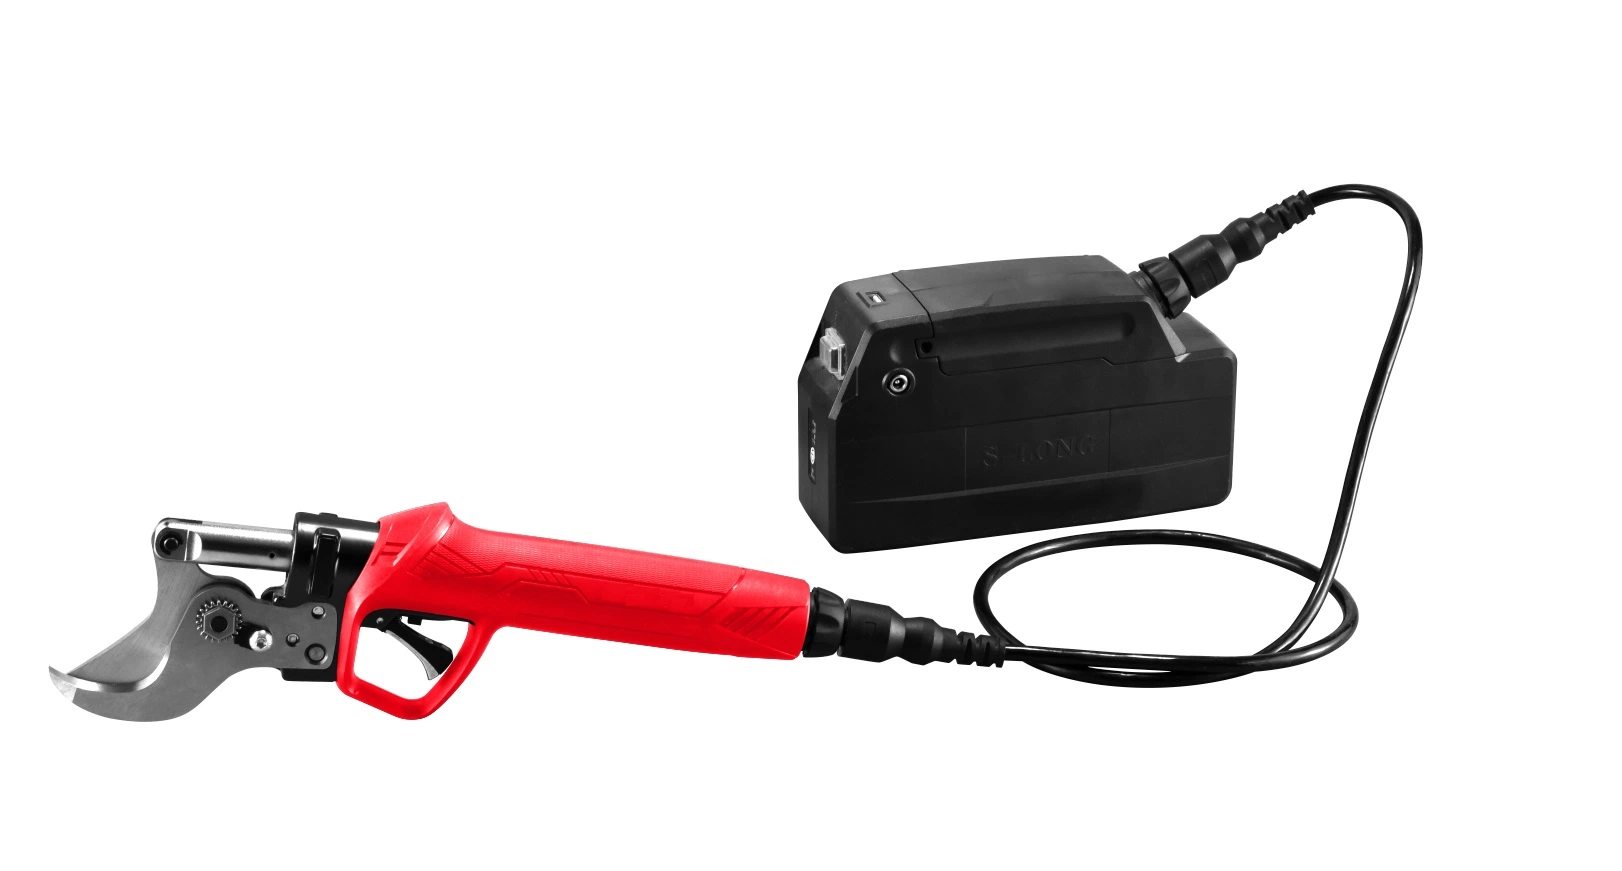 New-Digital LCD Display-DC16.8V Max-Li-ion Battery-Cordless/Electric-Garden/Farm Trees/Branches-Pruning Shears/Secateurs/Loppers-Power Tools